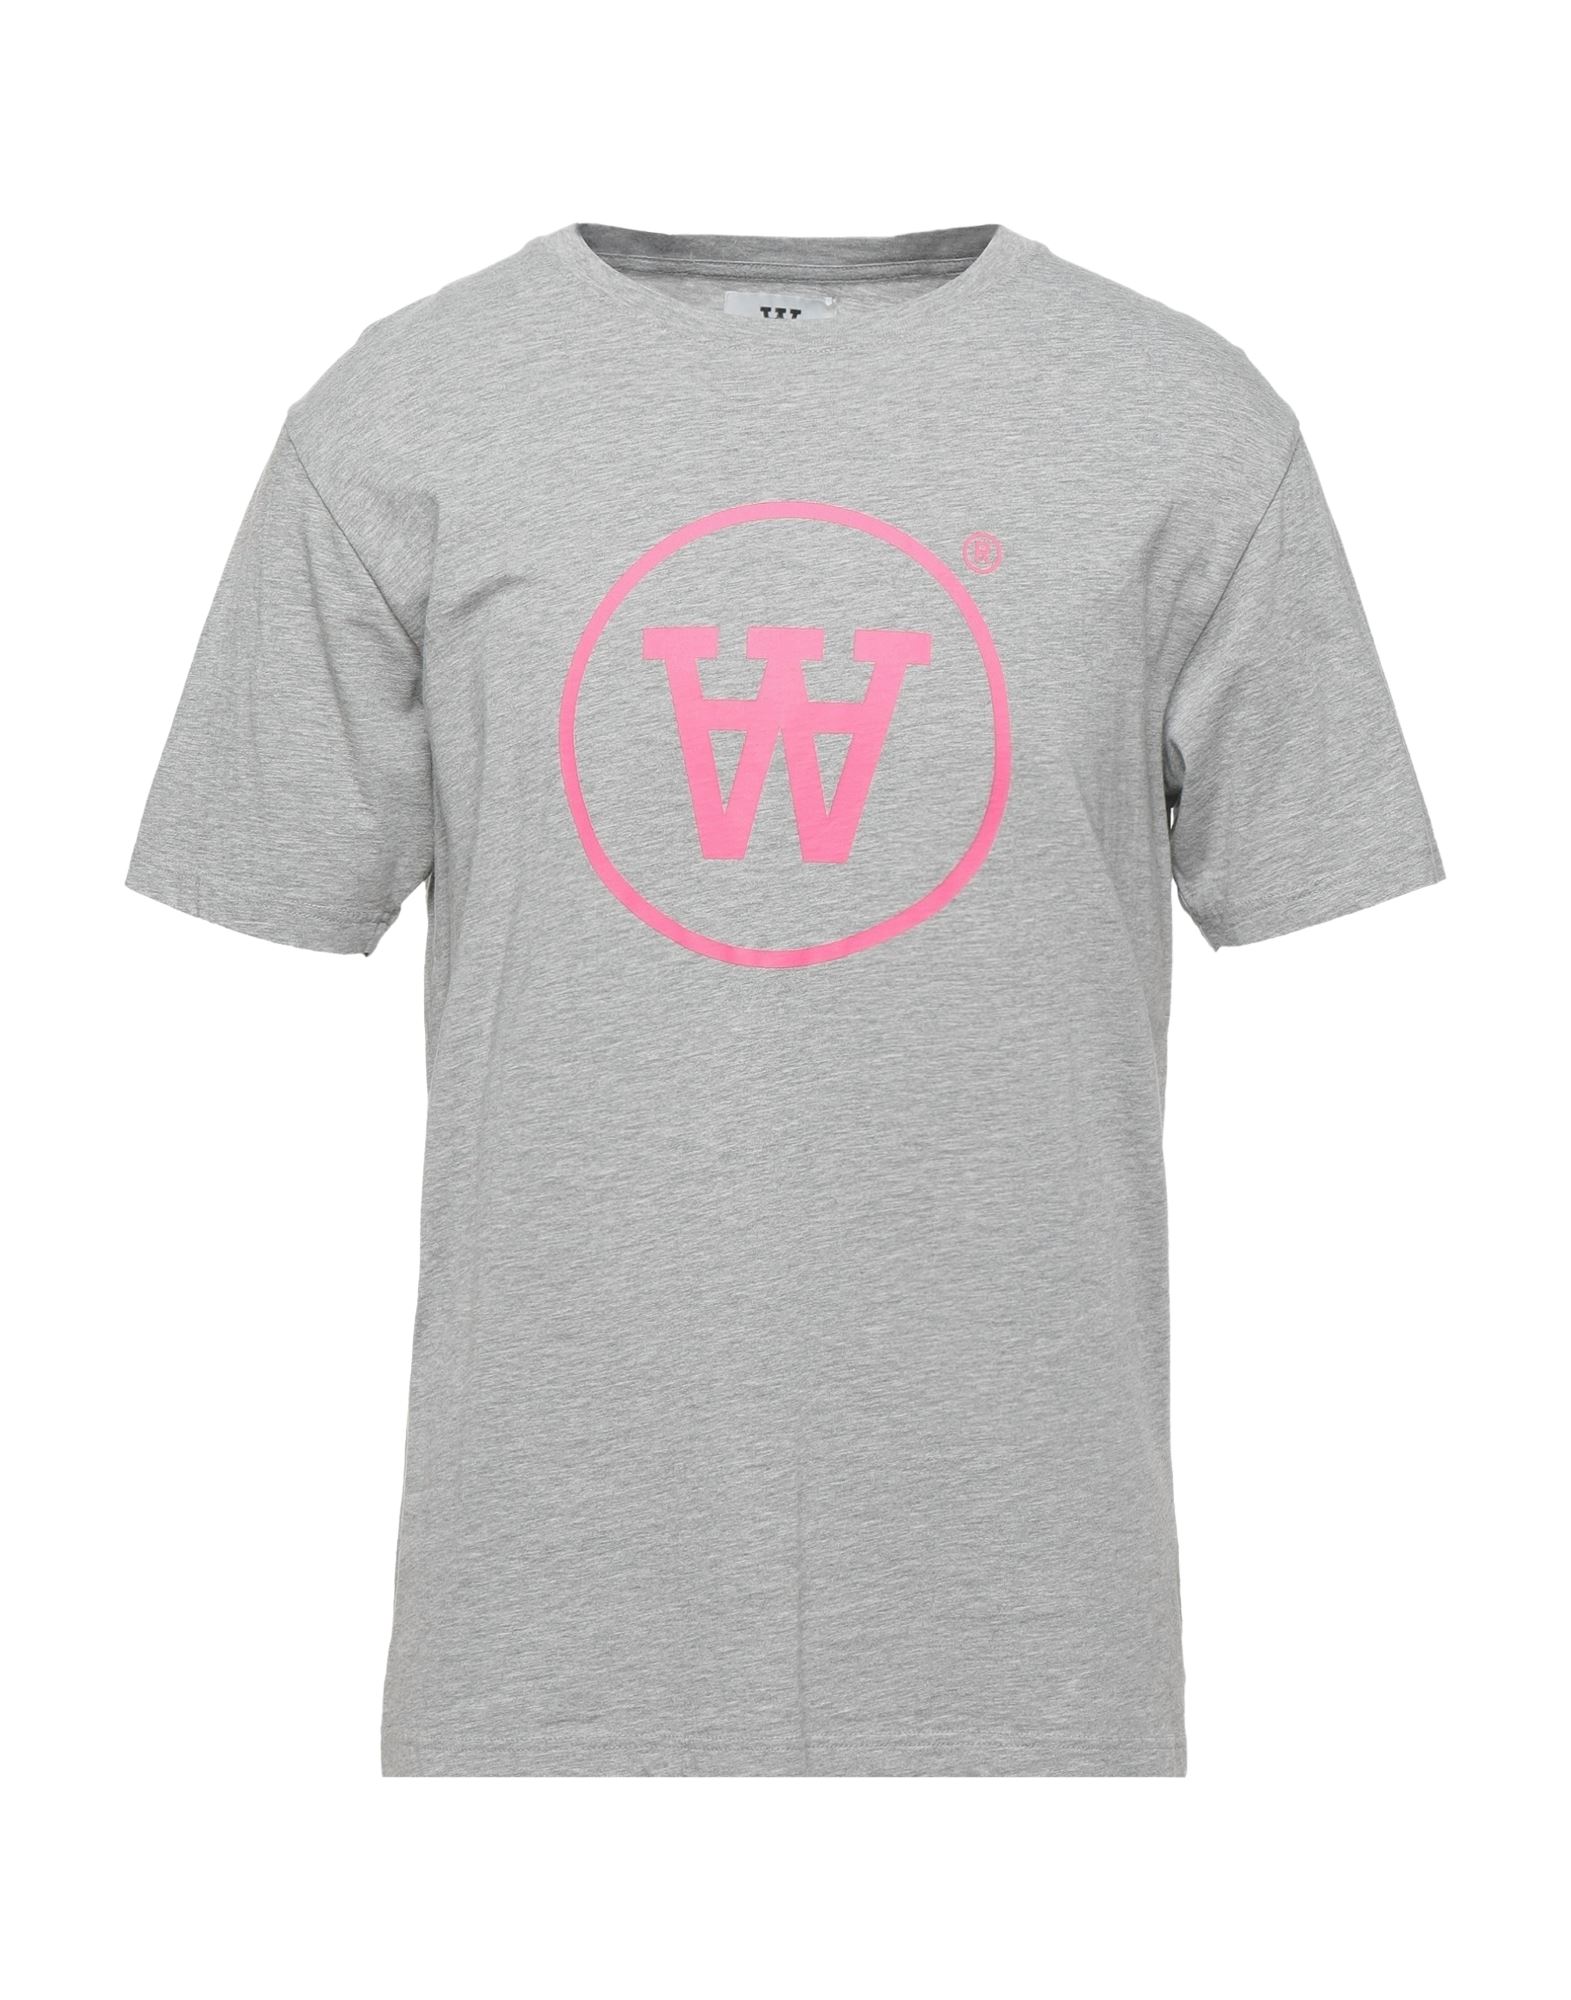 Double A By Wood Wood T-shirts In Grey